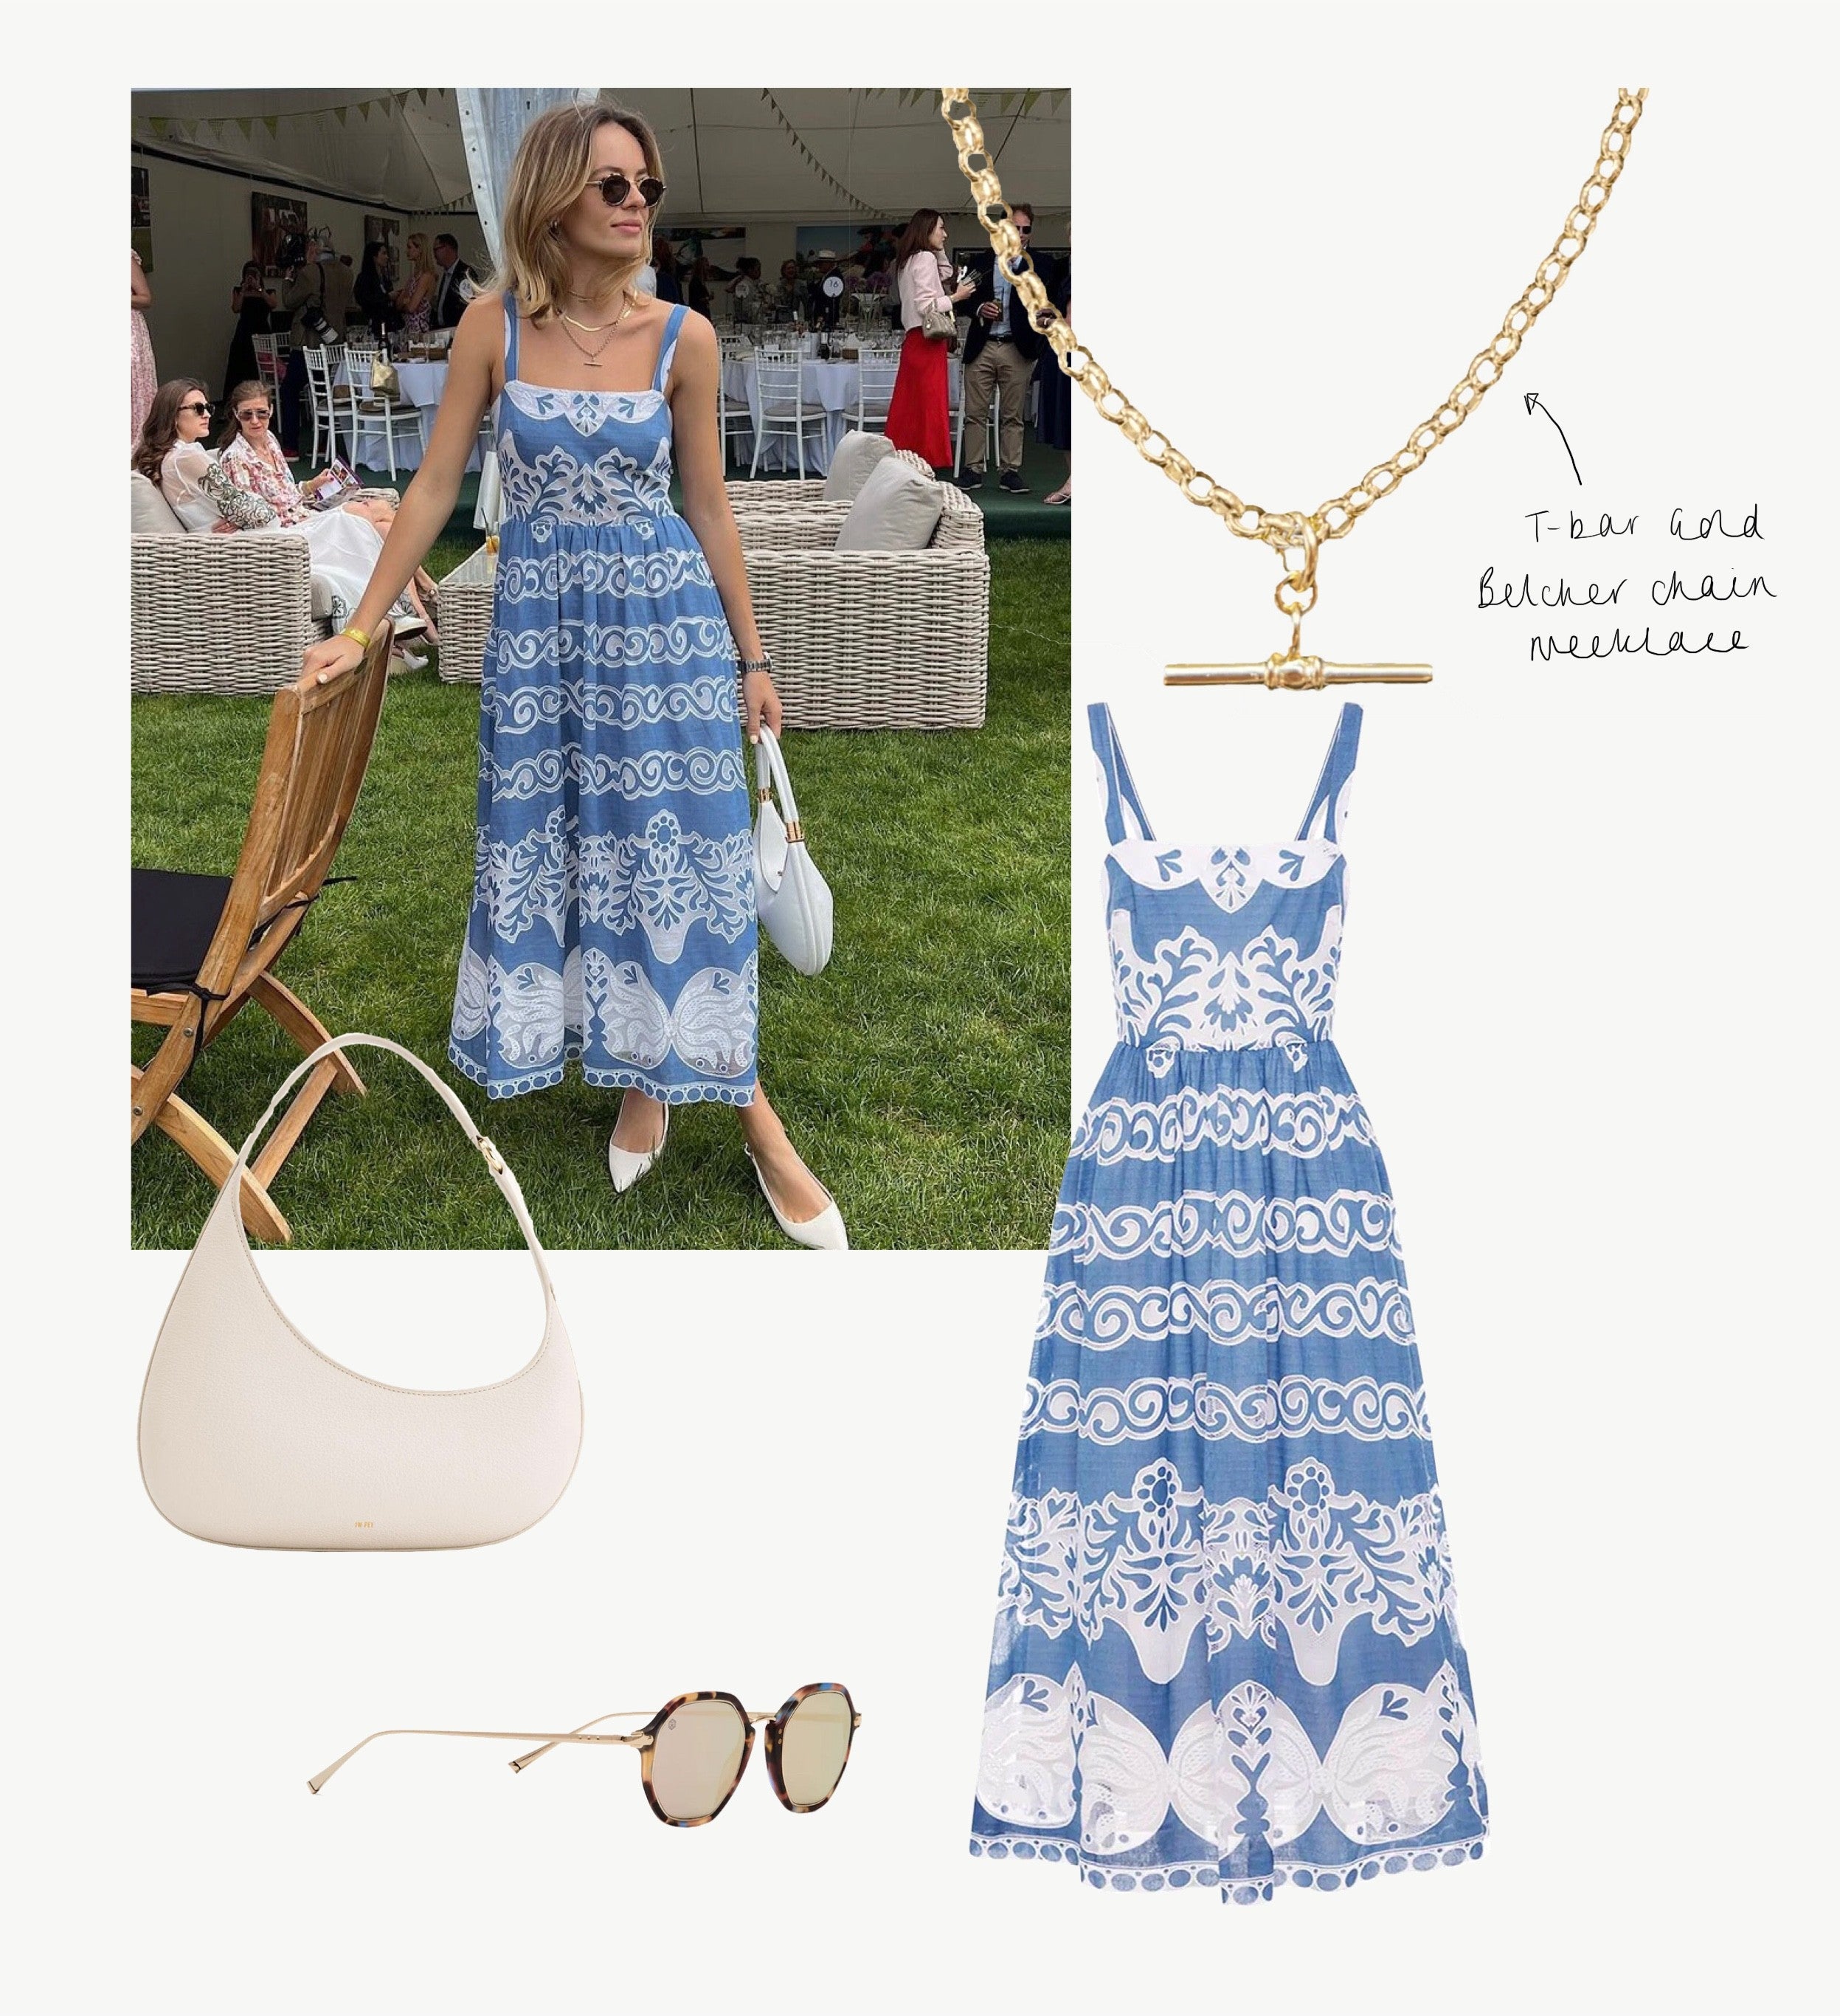 Shop The Look: Polo in the Park